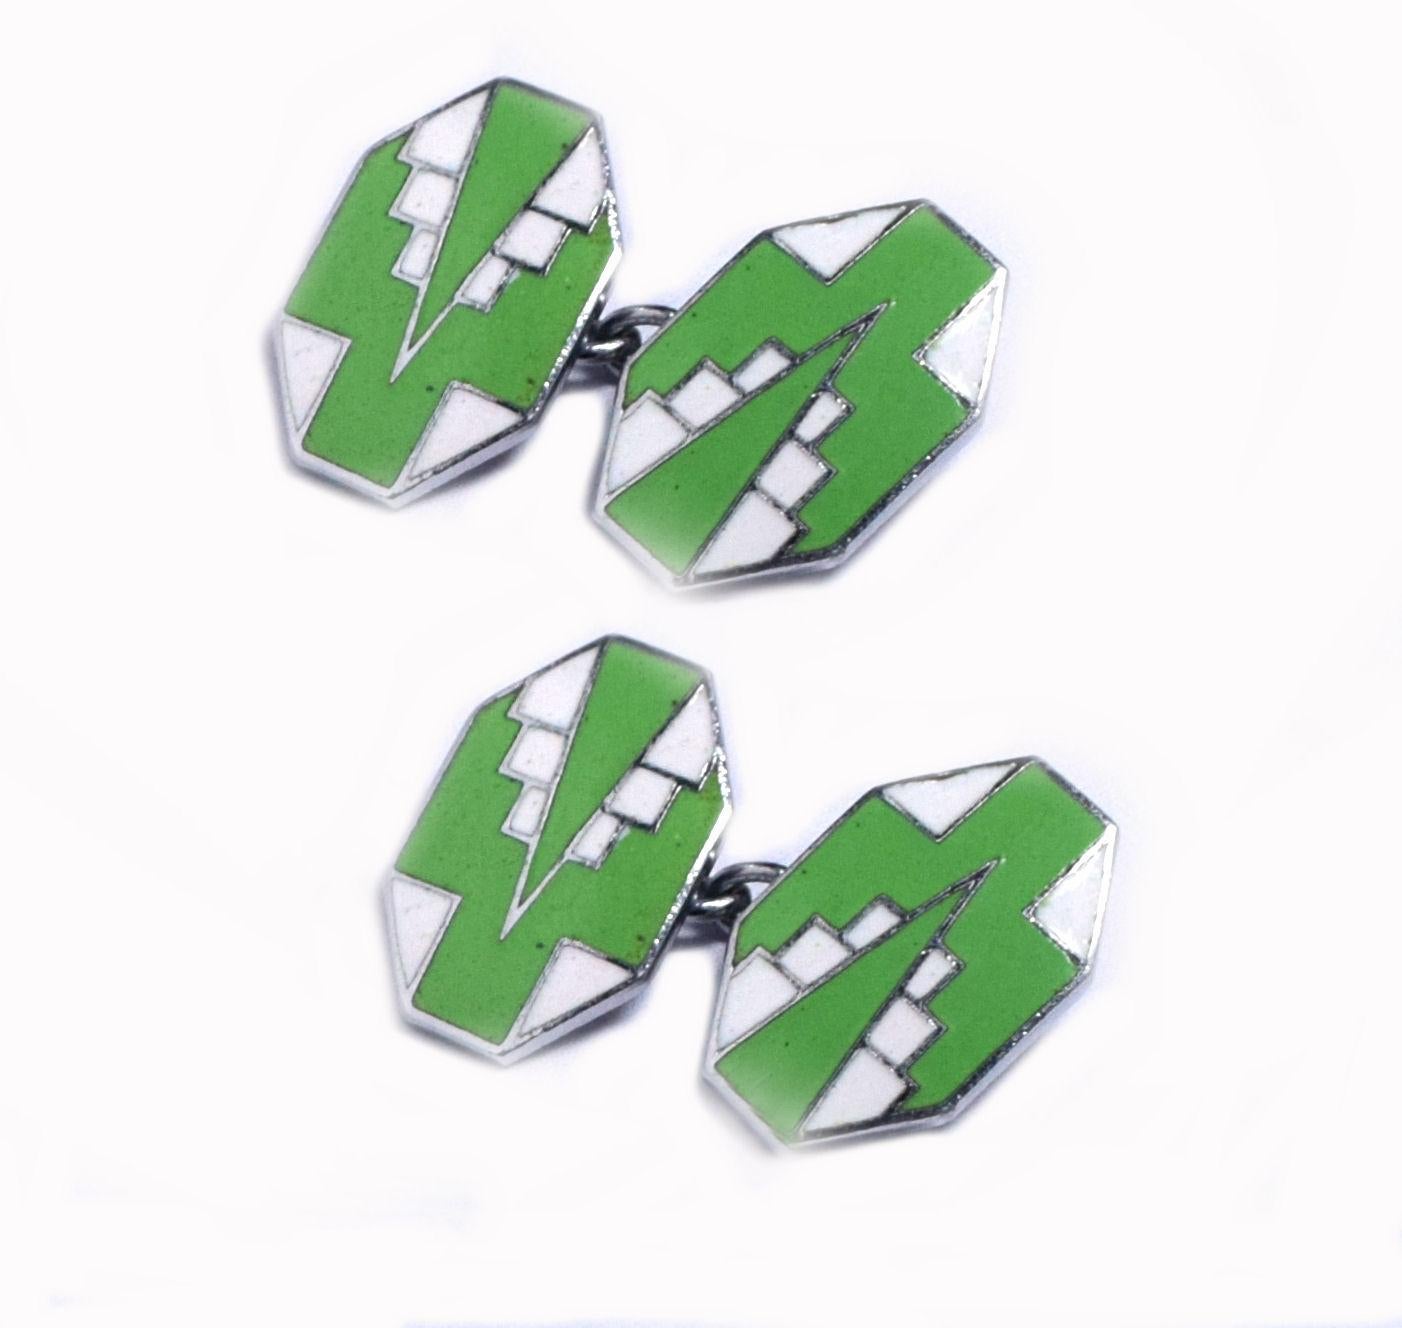 A rare find are these totally original enamel gents matching cufflinks dating from the 1930s. Great Art Deco geometric styling and color, can't be confused with any other era can they? Vivid bright pea green and white enamelling on a bright chromed